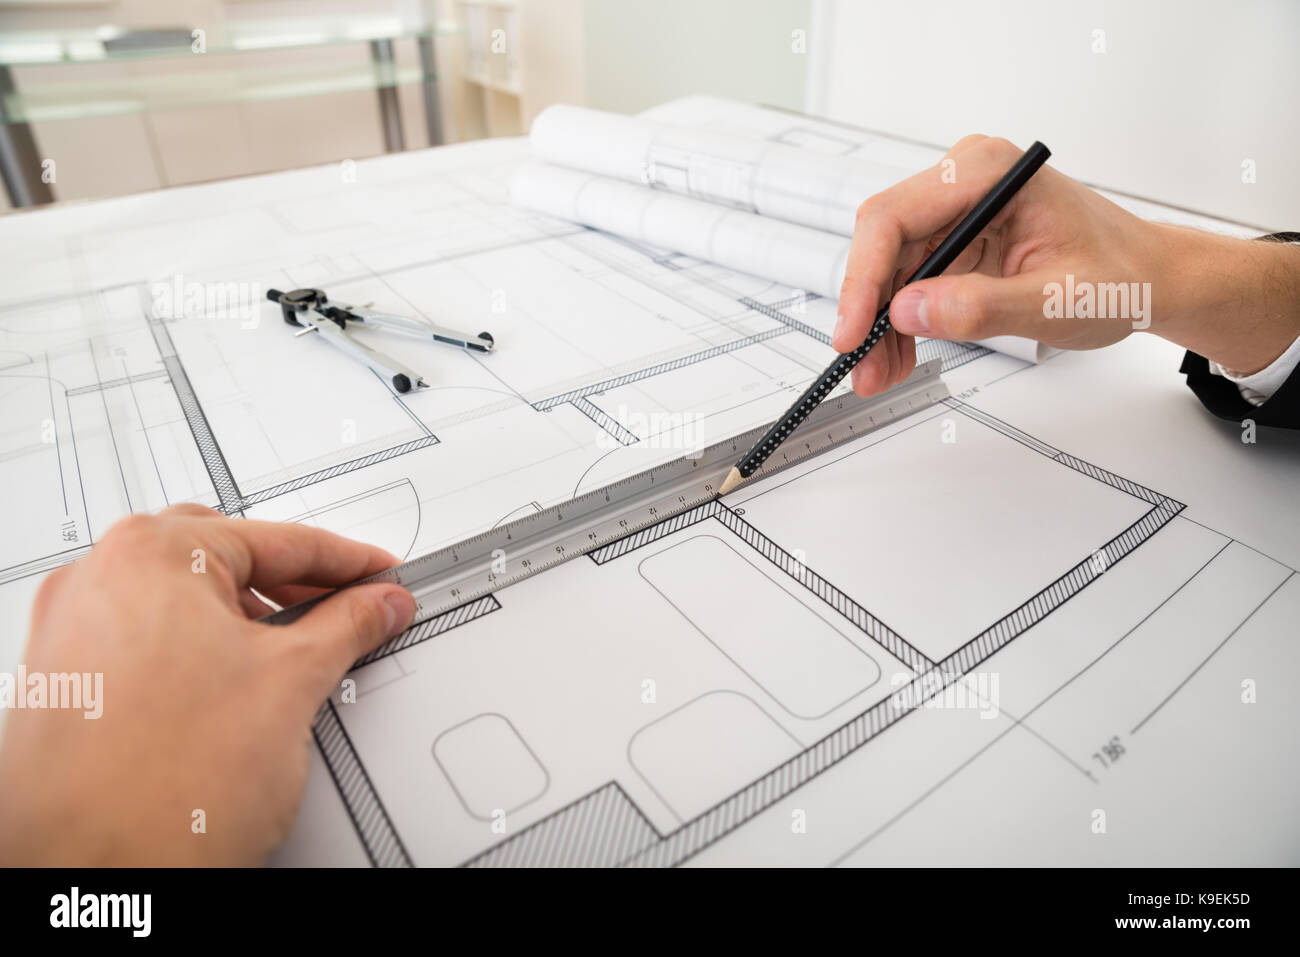 Close-up Of Engineer Drawing Diagrams With Pencil And Ruler On Blueprint Paper Stock Photo